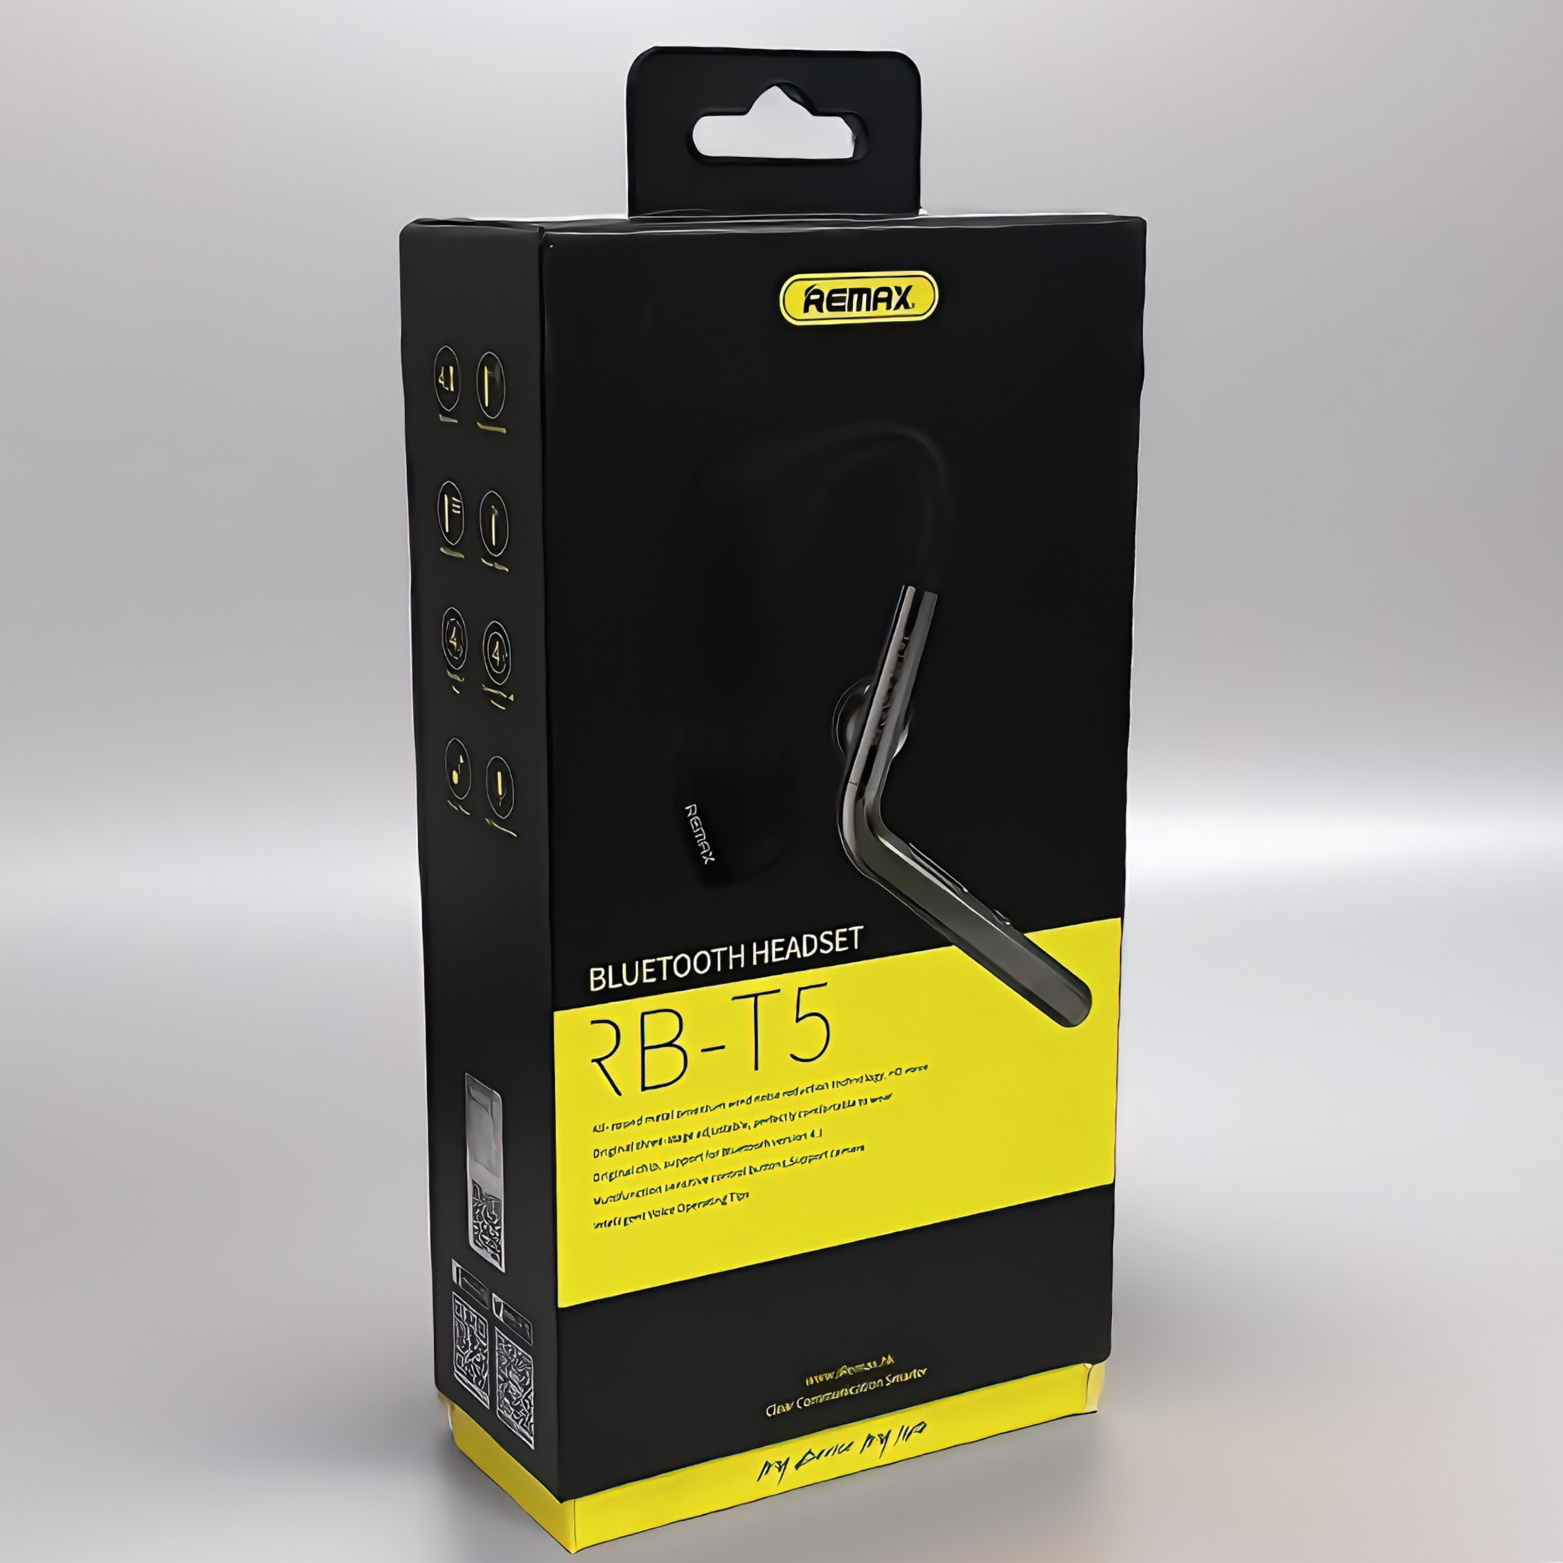 Remax RB T5 Bluetooth Headset In Retail Packaging